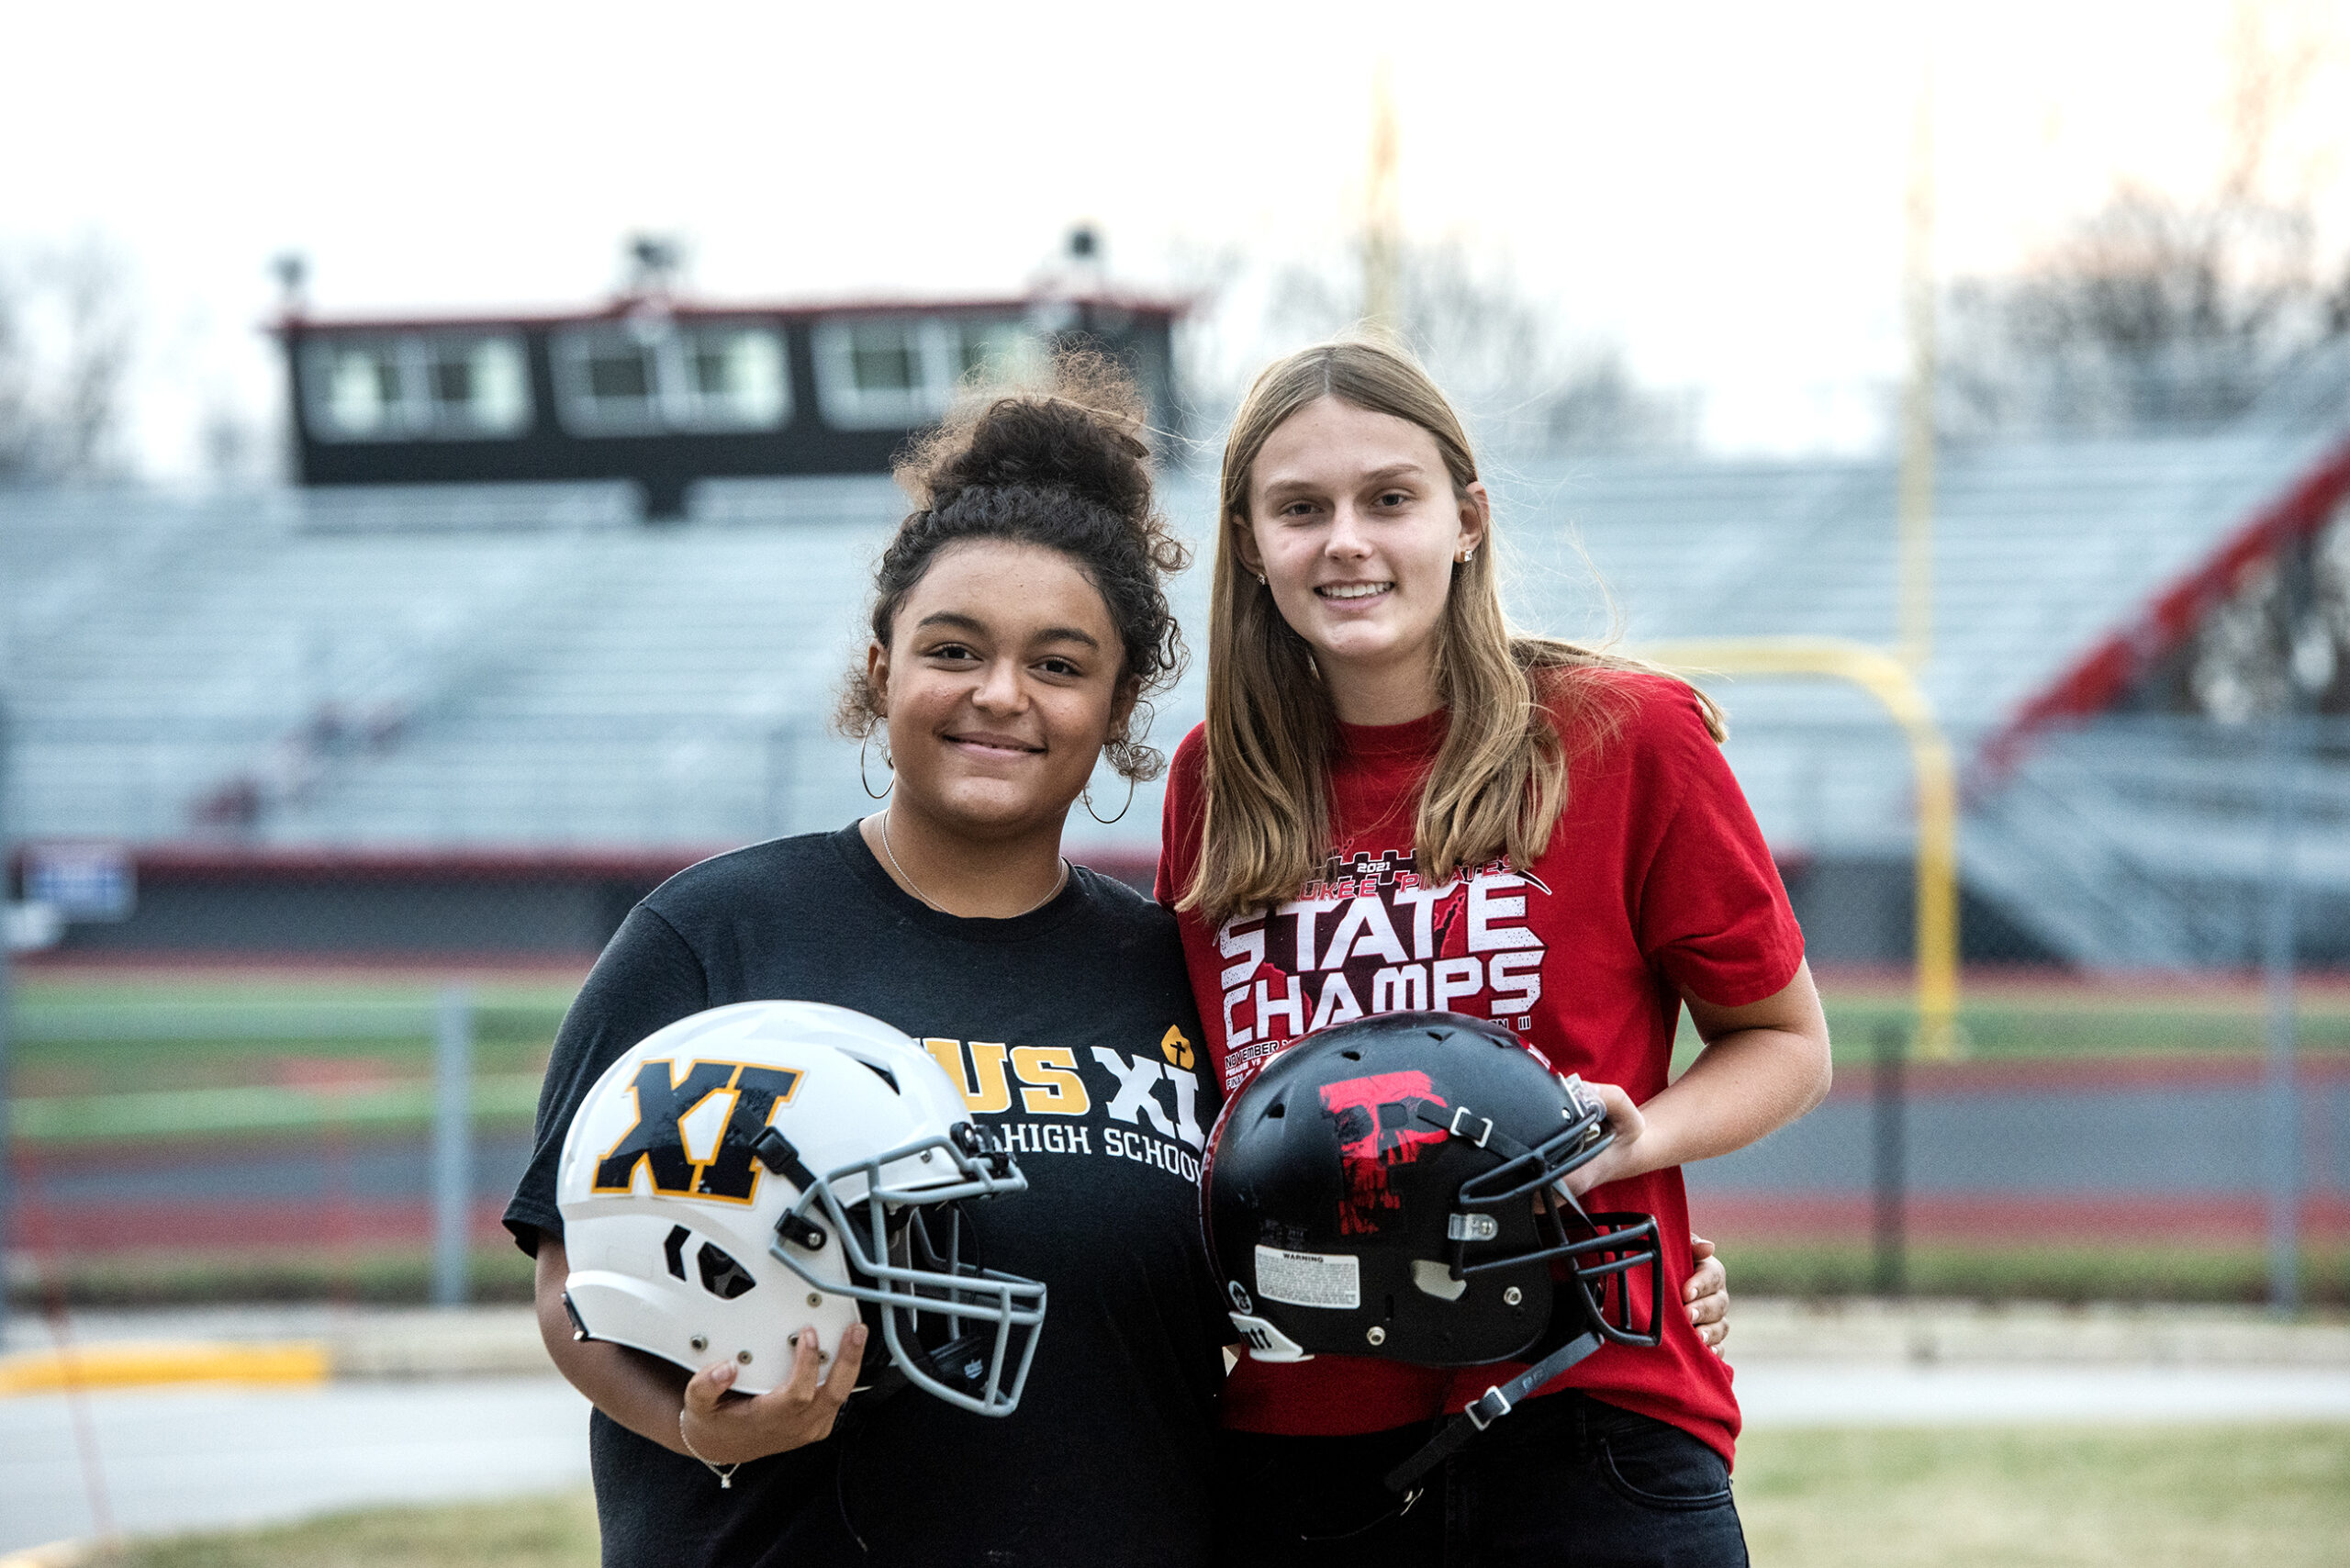 ‘I look up to you’: Pioneer female quarterback in Wisconsin inspires after touchdown pass